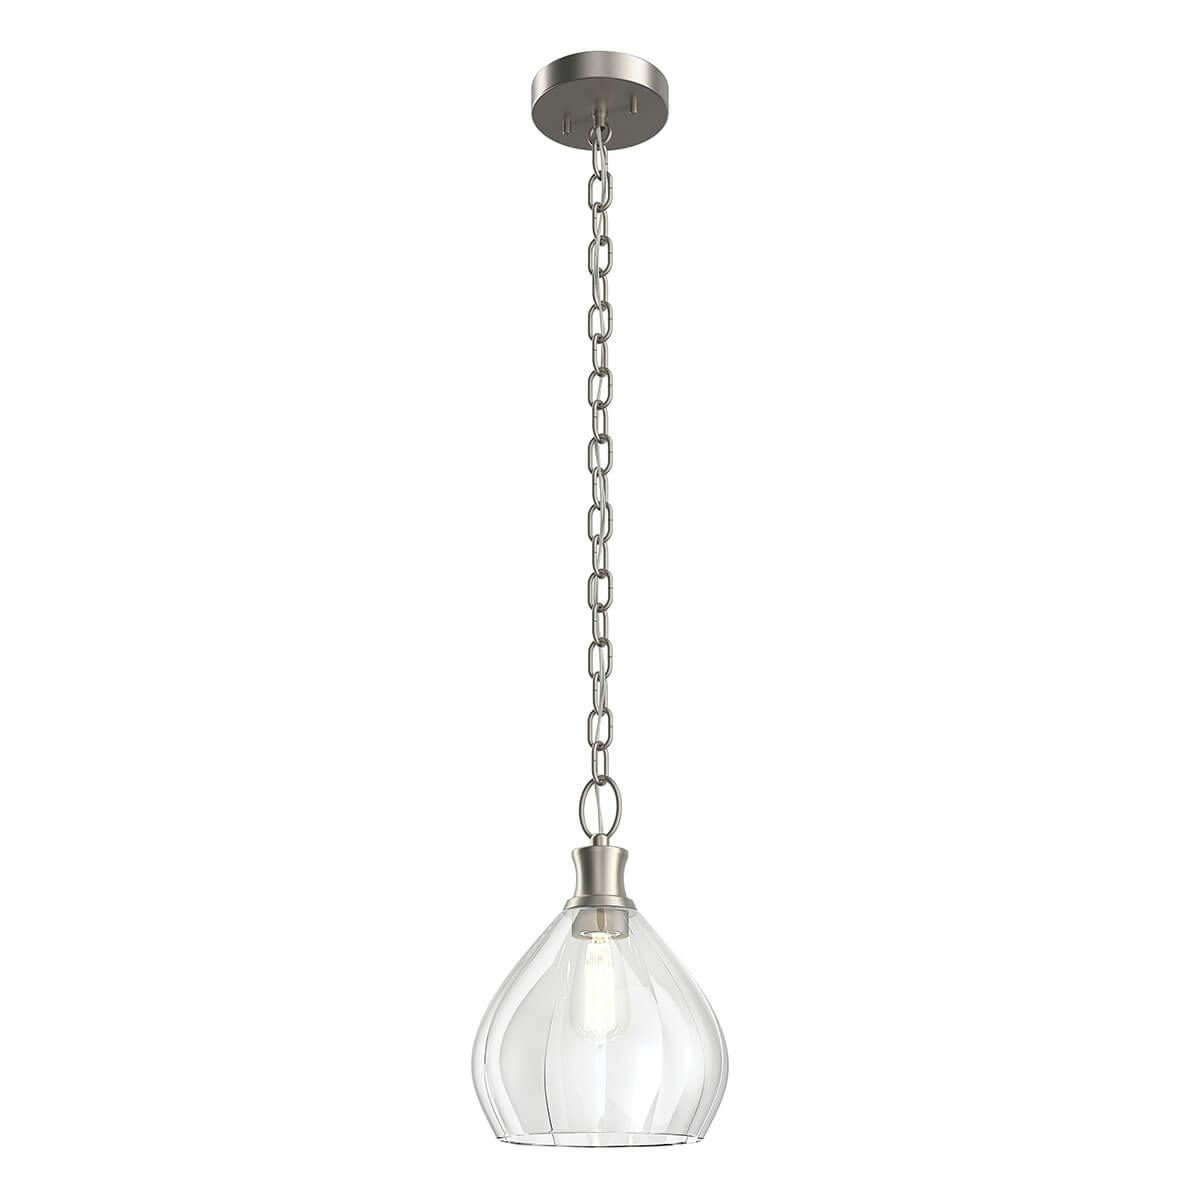 Merriam 8" 1 Light Pendant Brushed Nickel on a white background